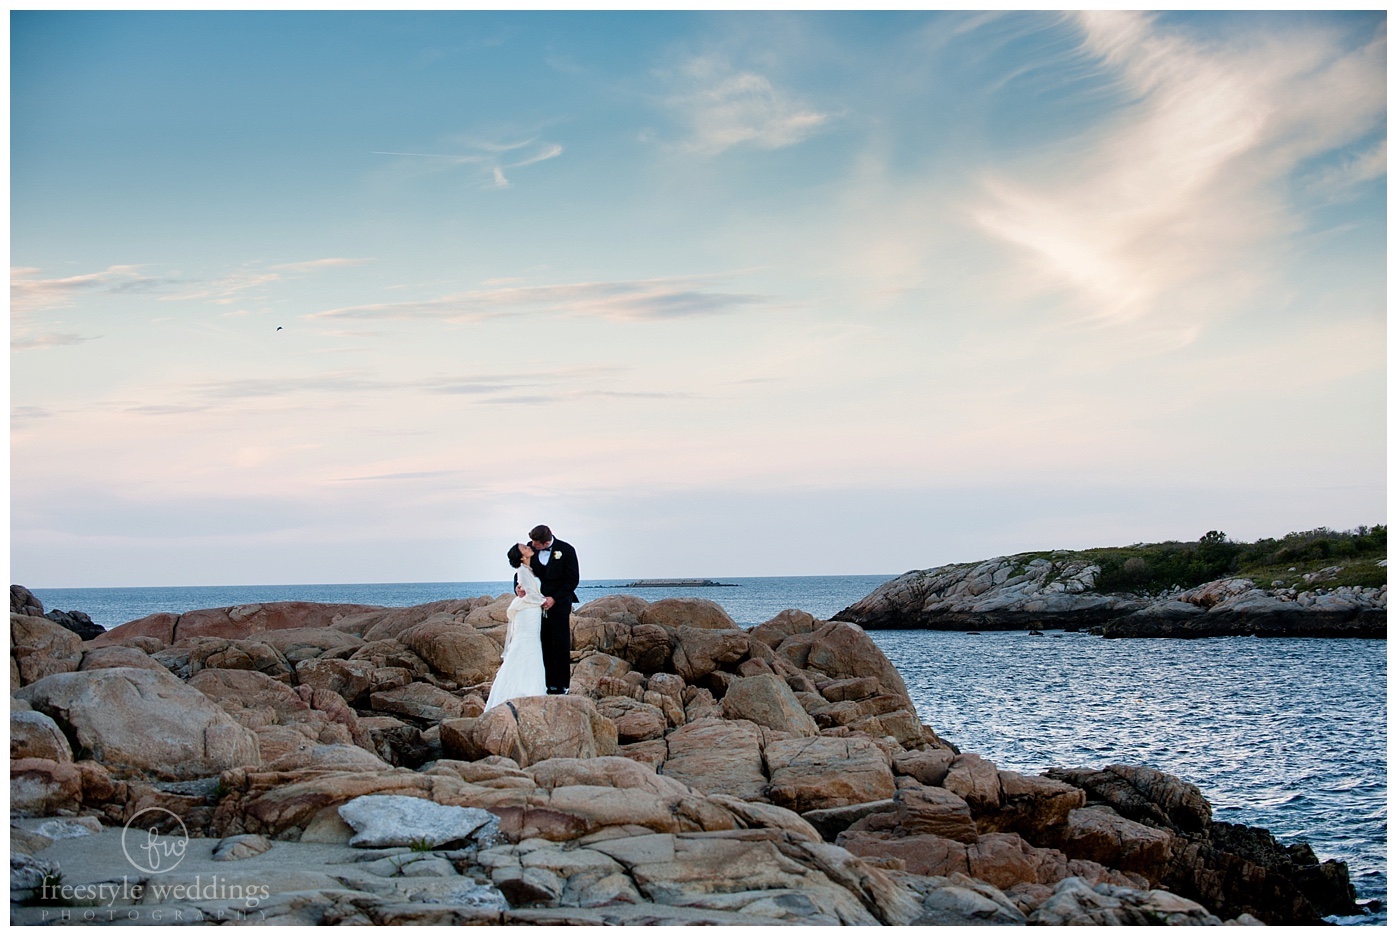 private home wedding in rockport, ma photographed by freestyle weddings